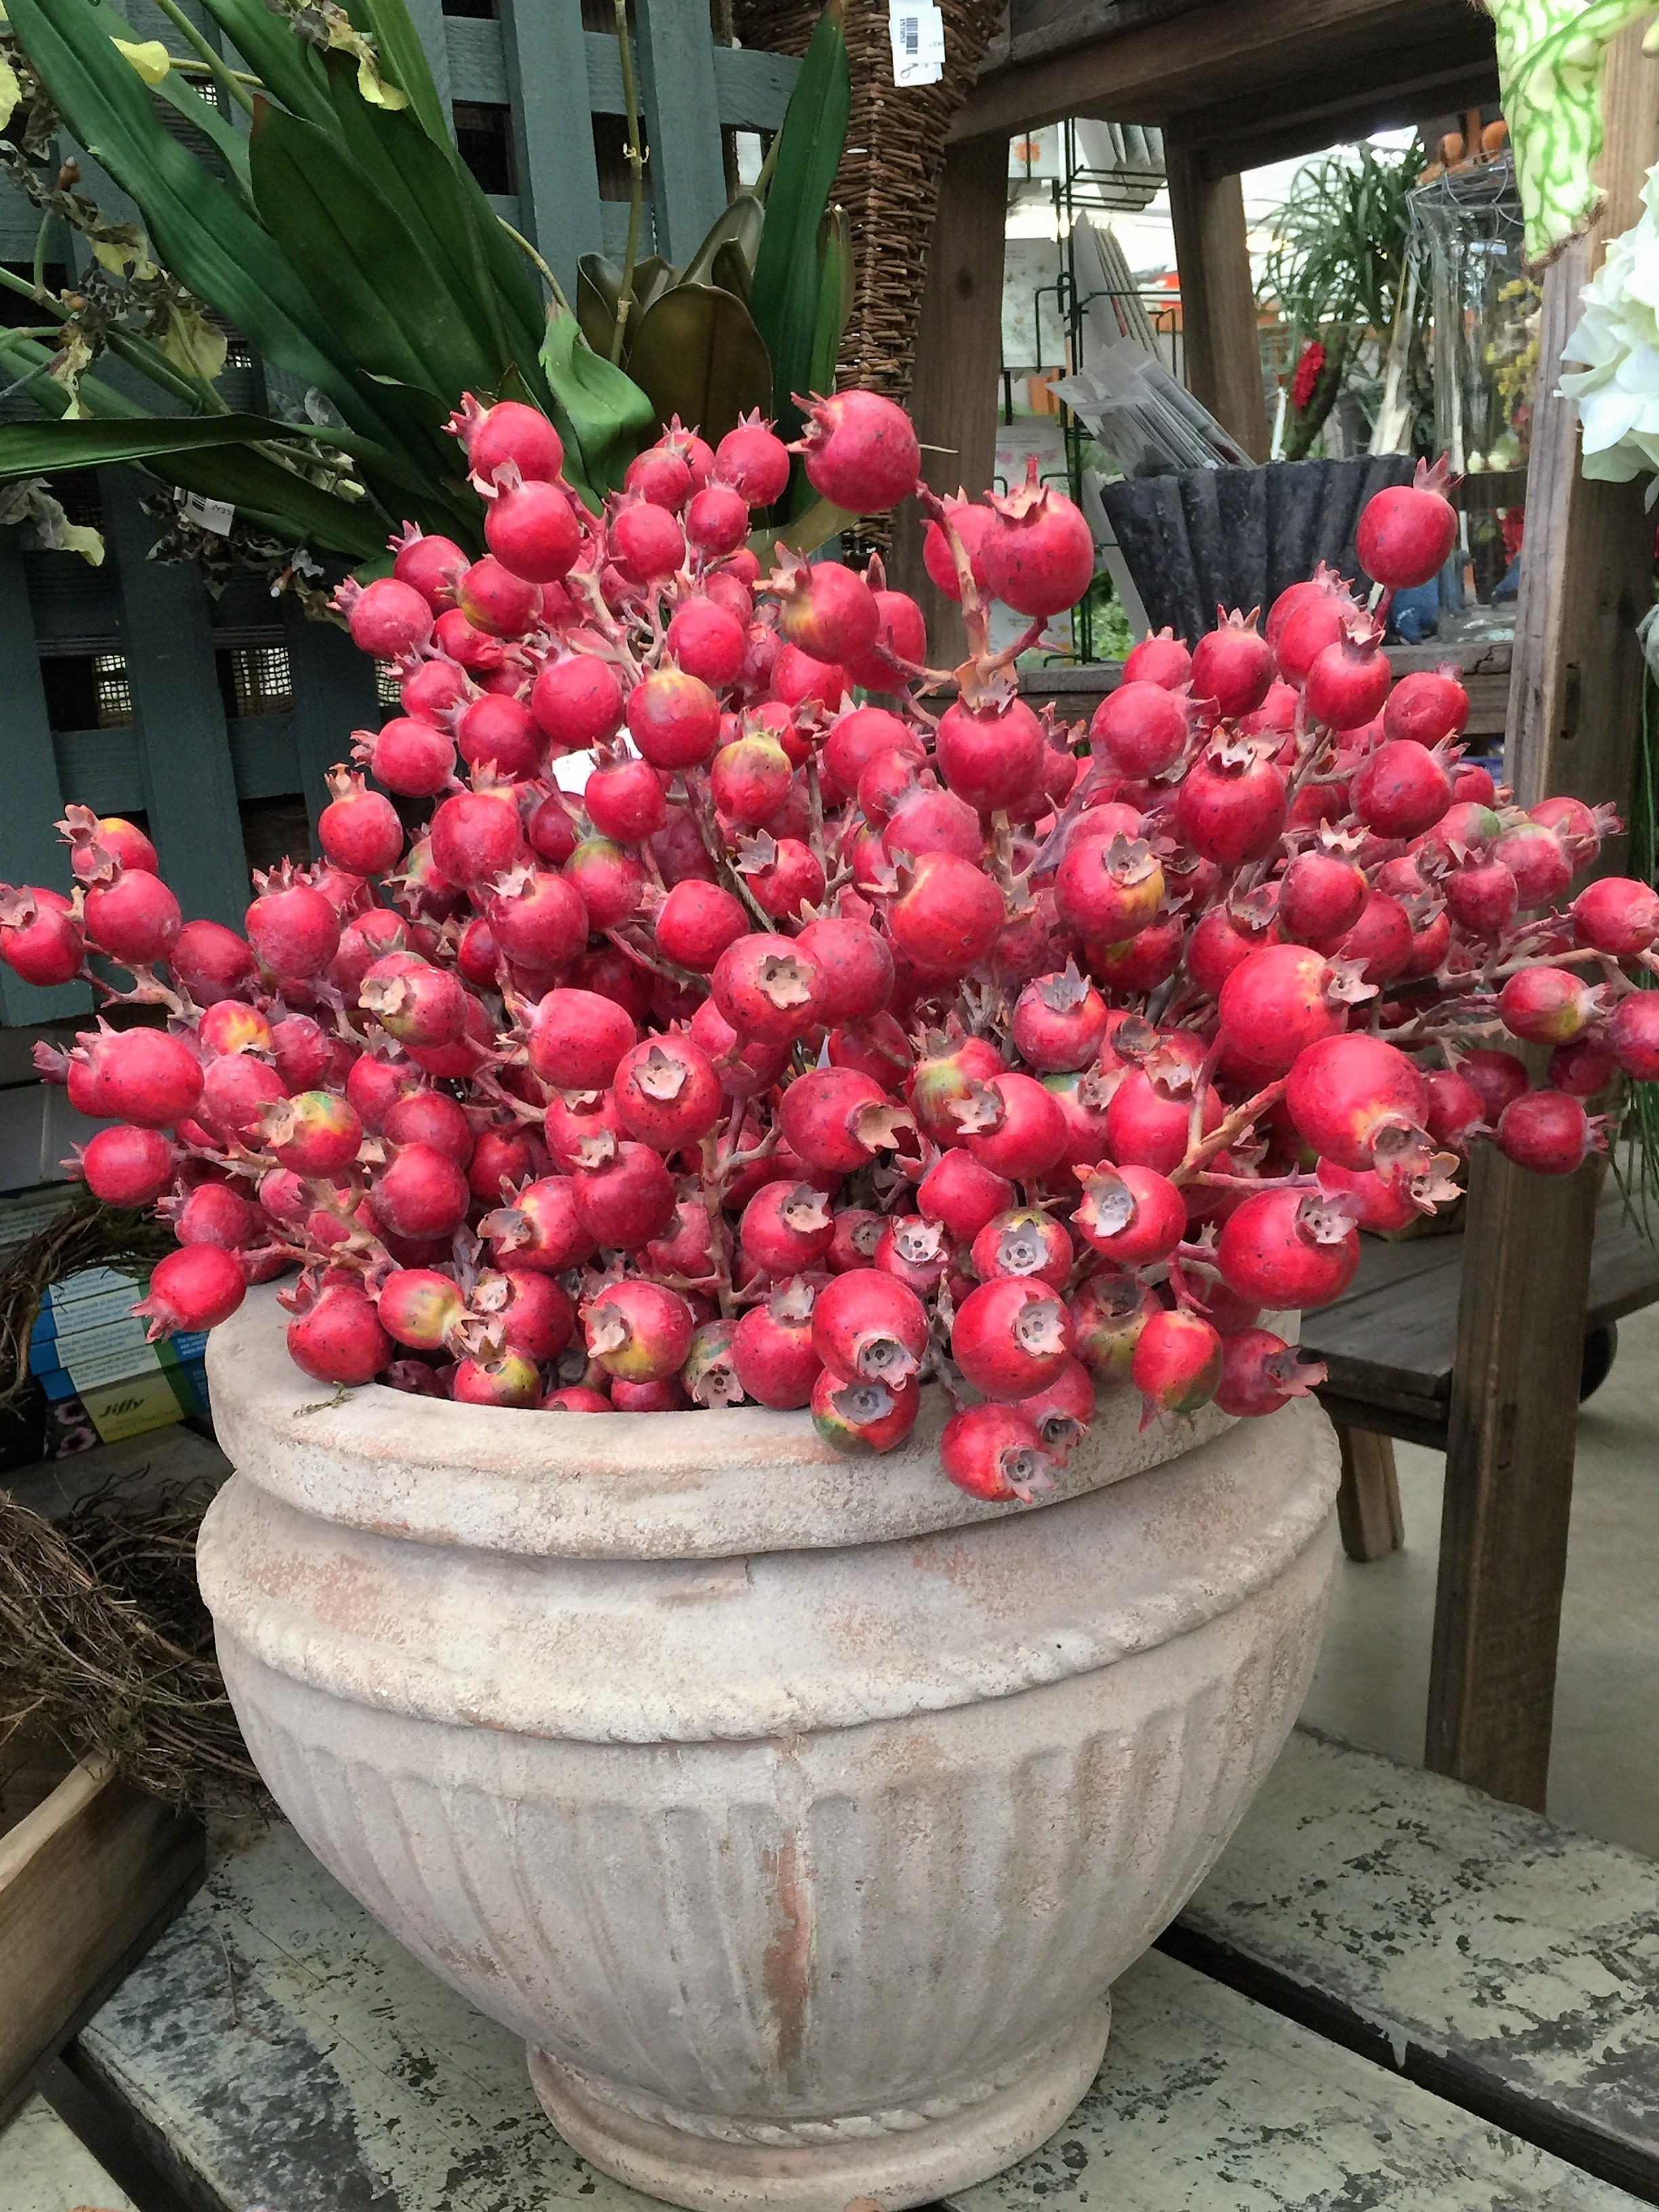 Yummy silk rose hips are perfect for all seasons, even holiday wreaths.